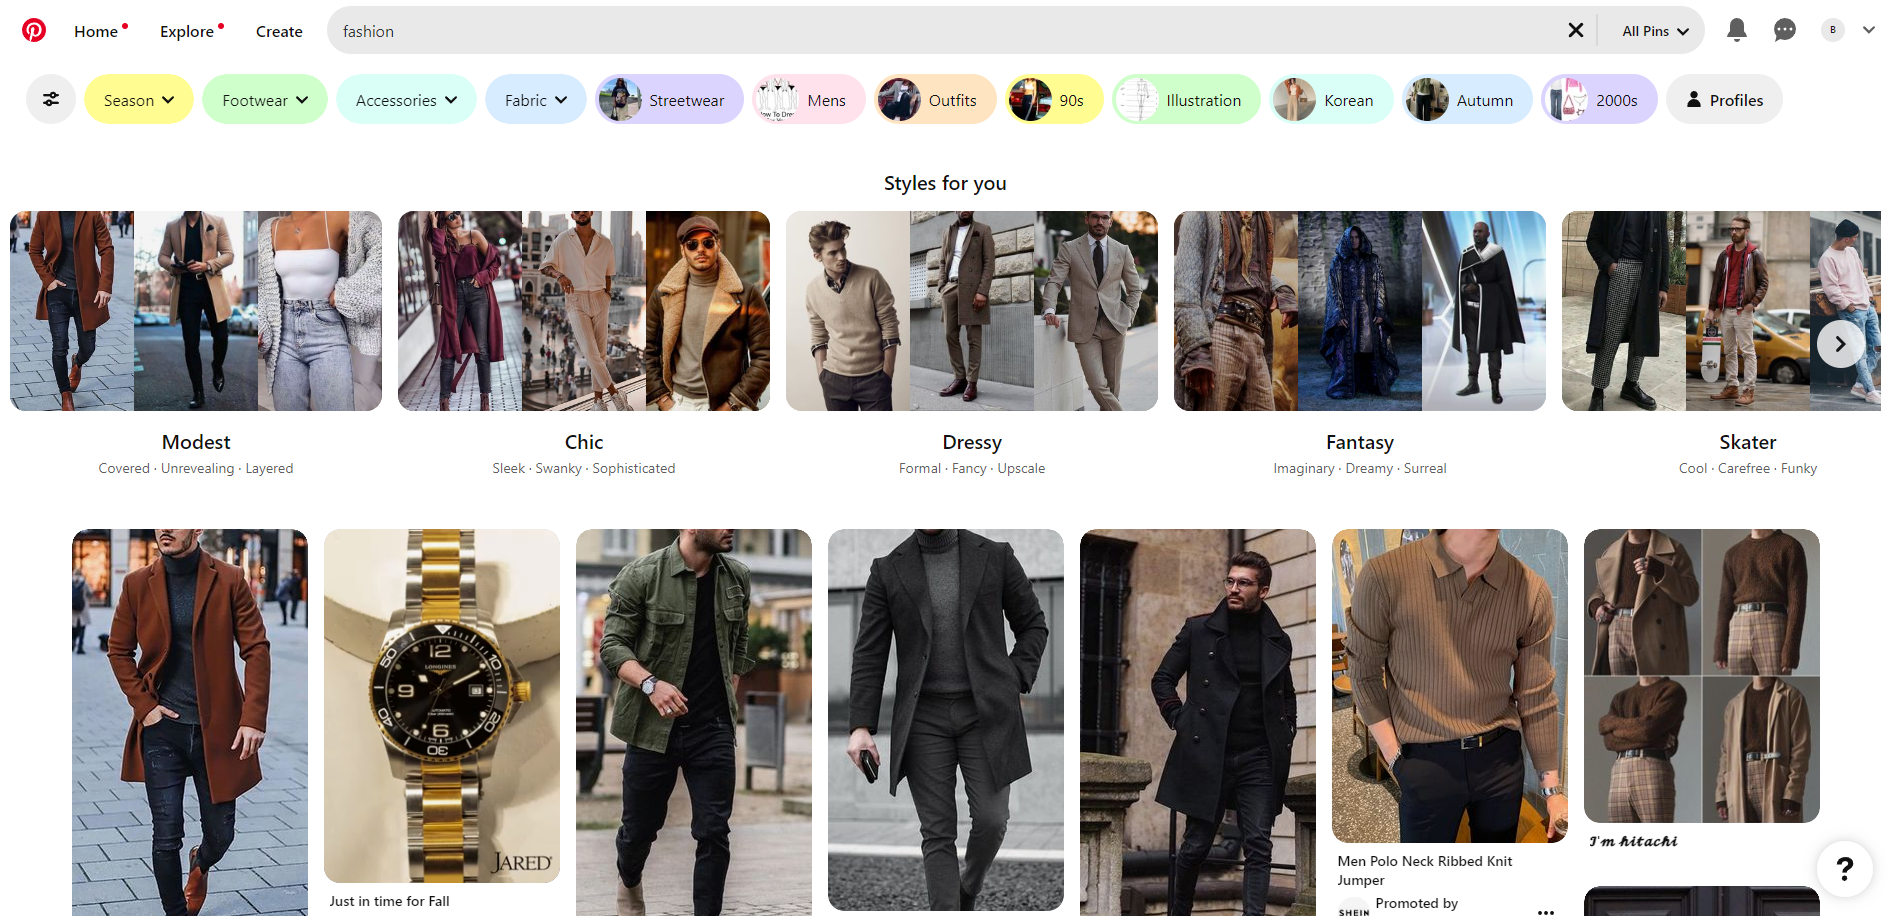 Tiles of men's fashion suggestions from Pinterest